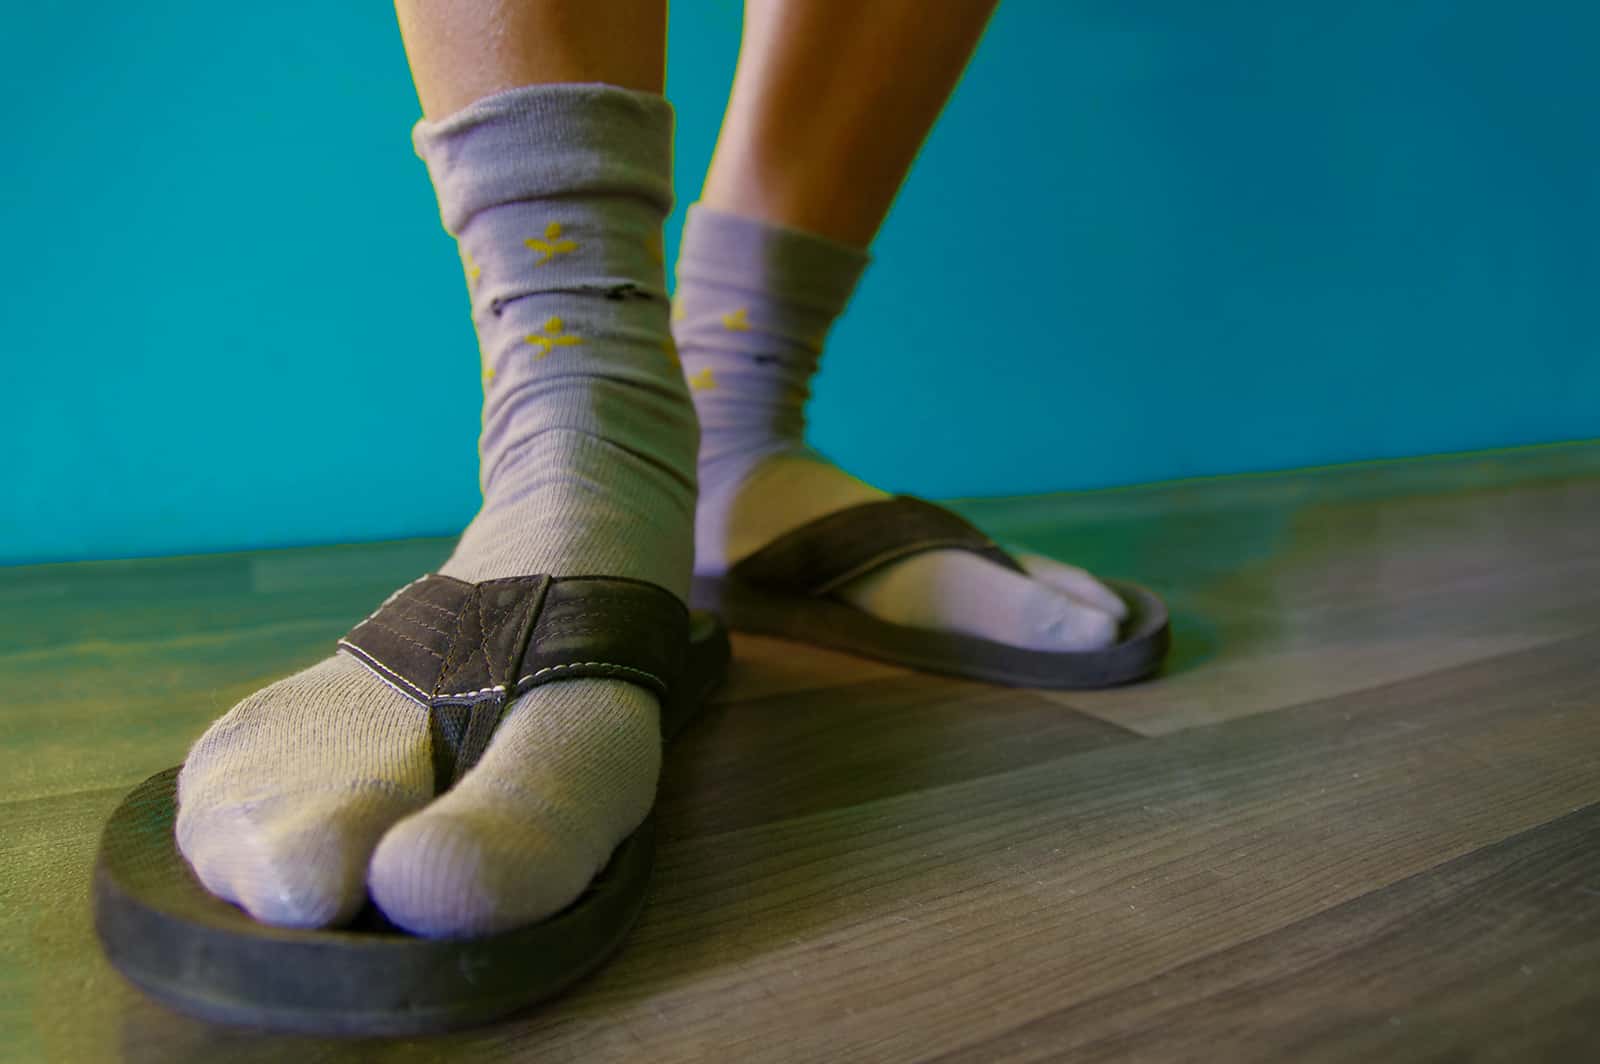 smuggling Chair vacancy Socks and Sandals: What's with All the Controversy? – flojossandals